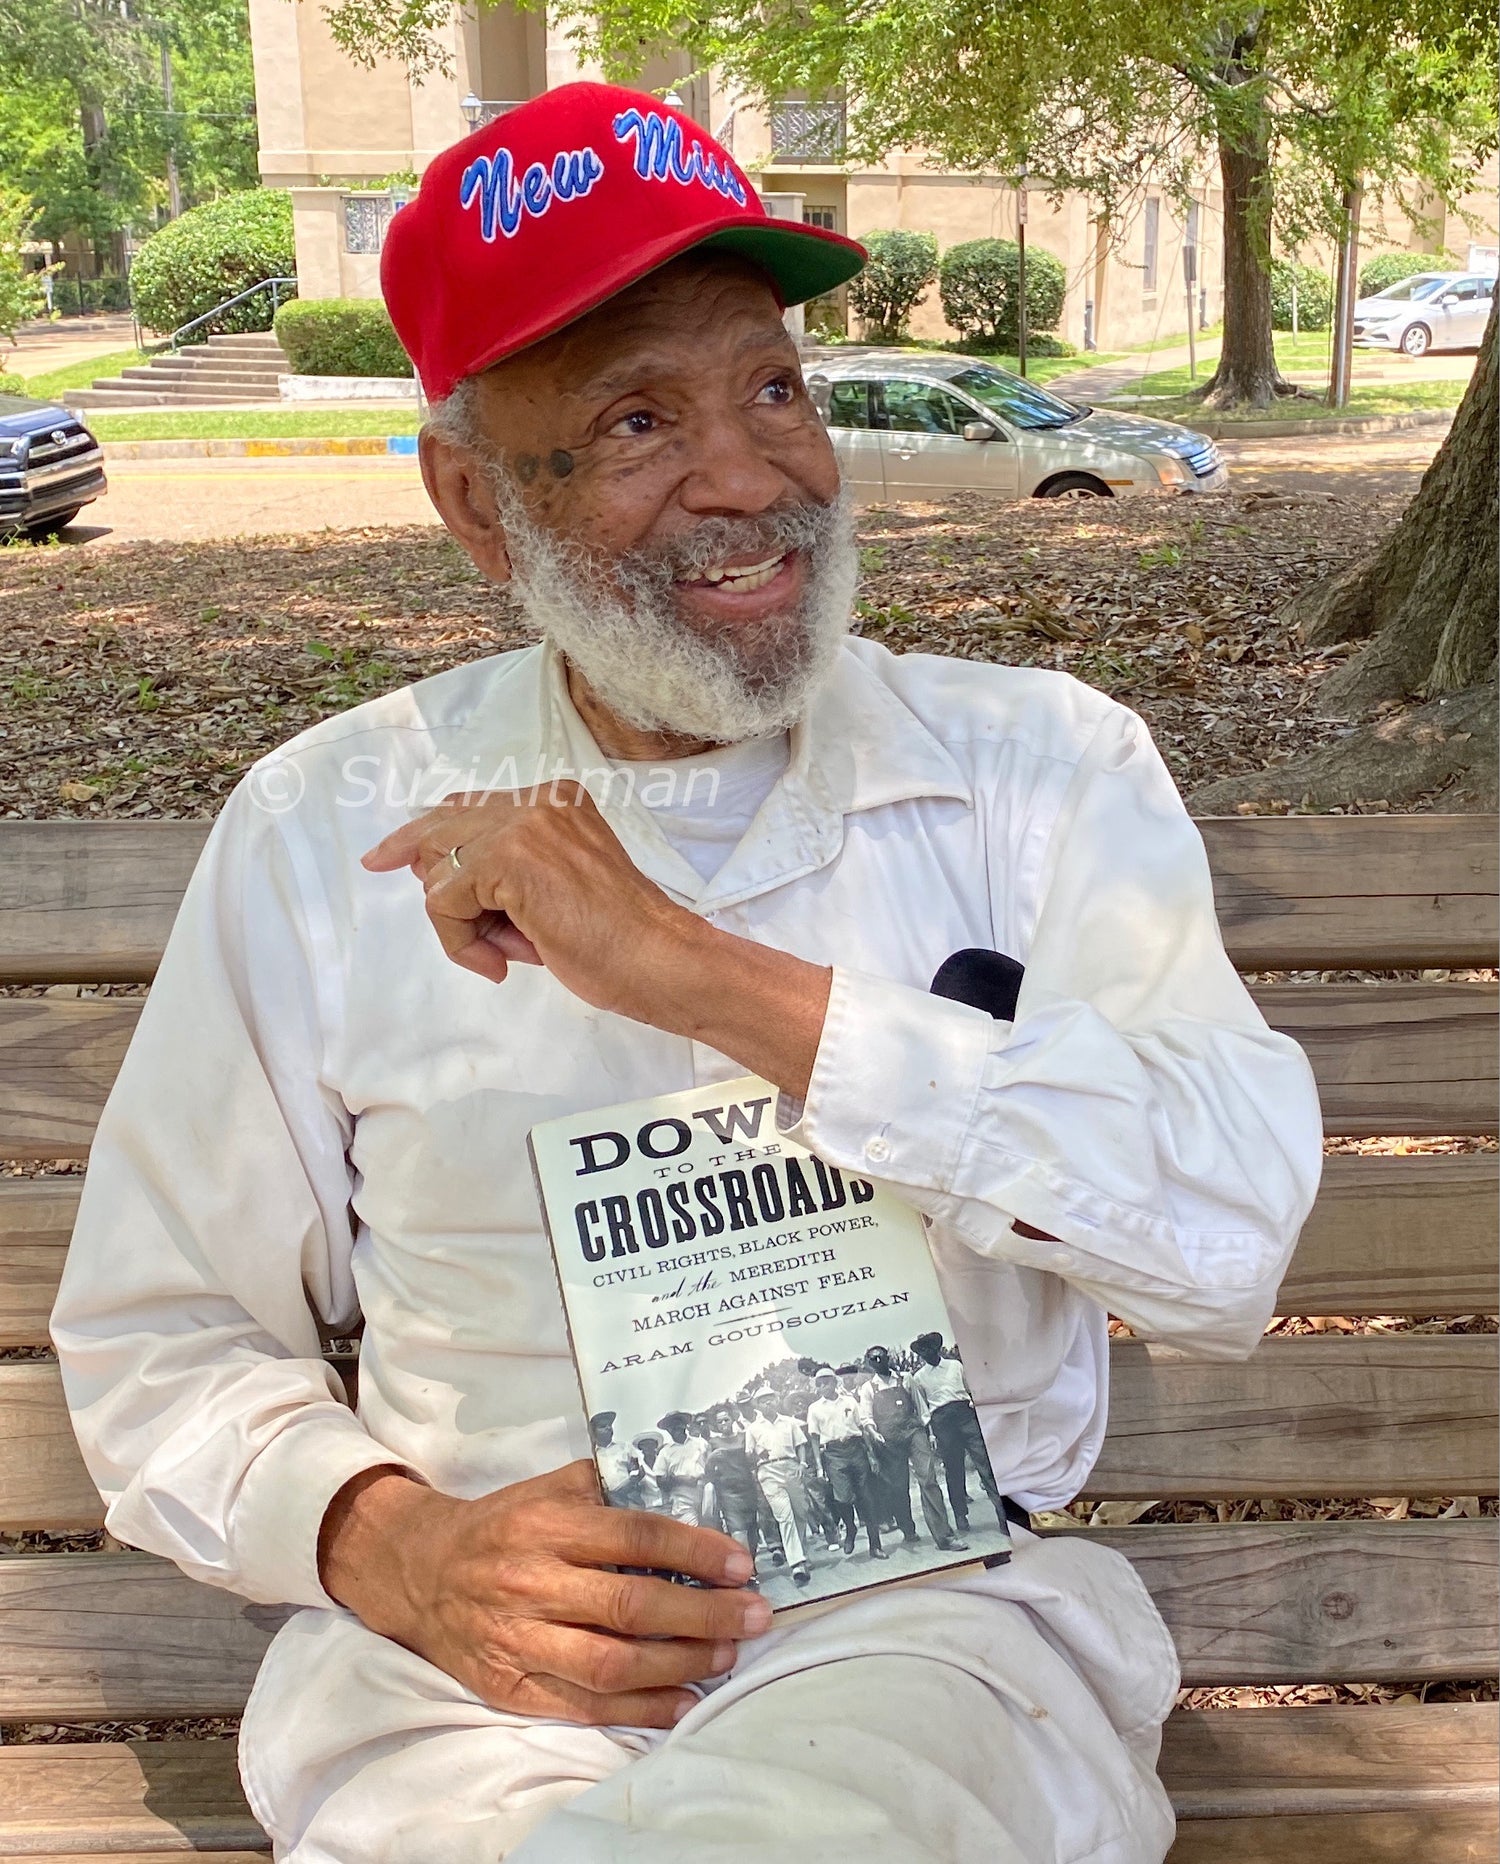 James Meredith smiling on shaded park bench wearing bright red baseball cap with New Miss embroidered in blue script 